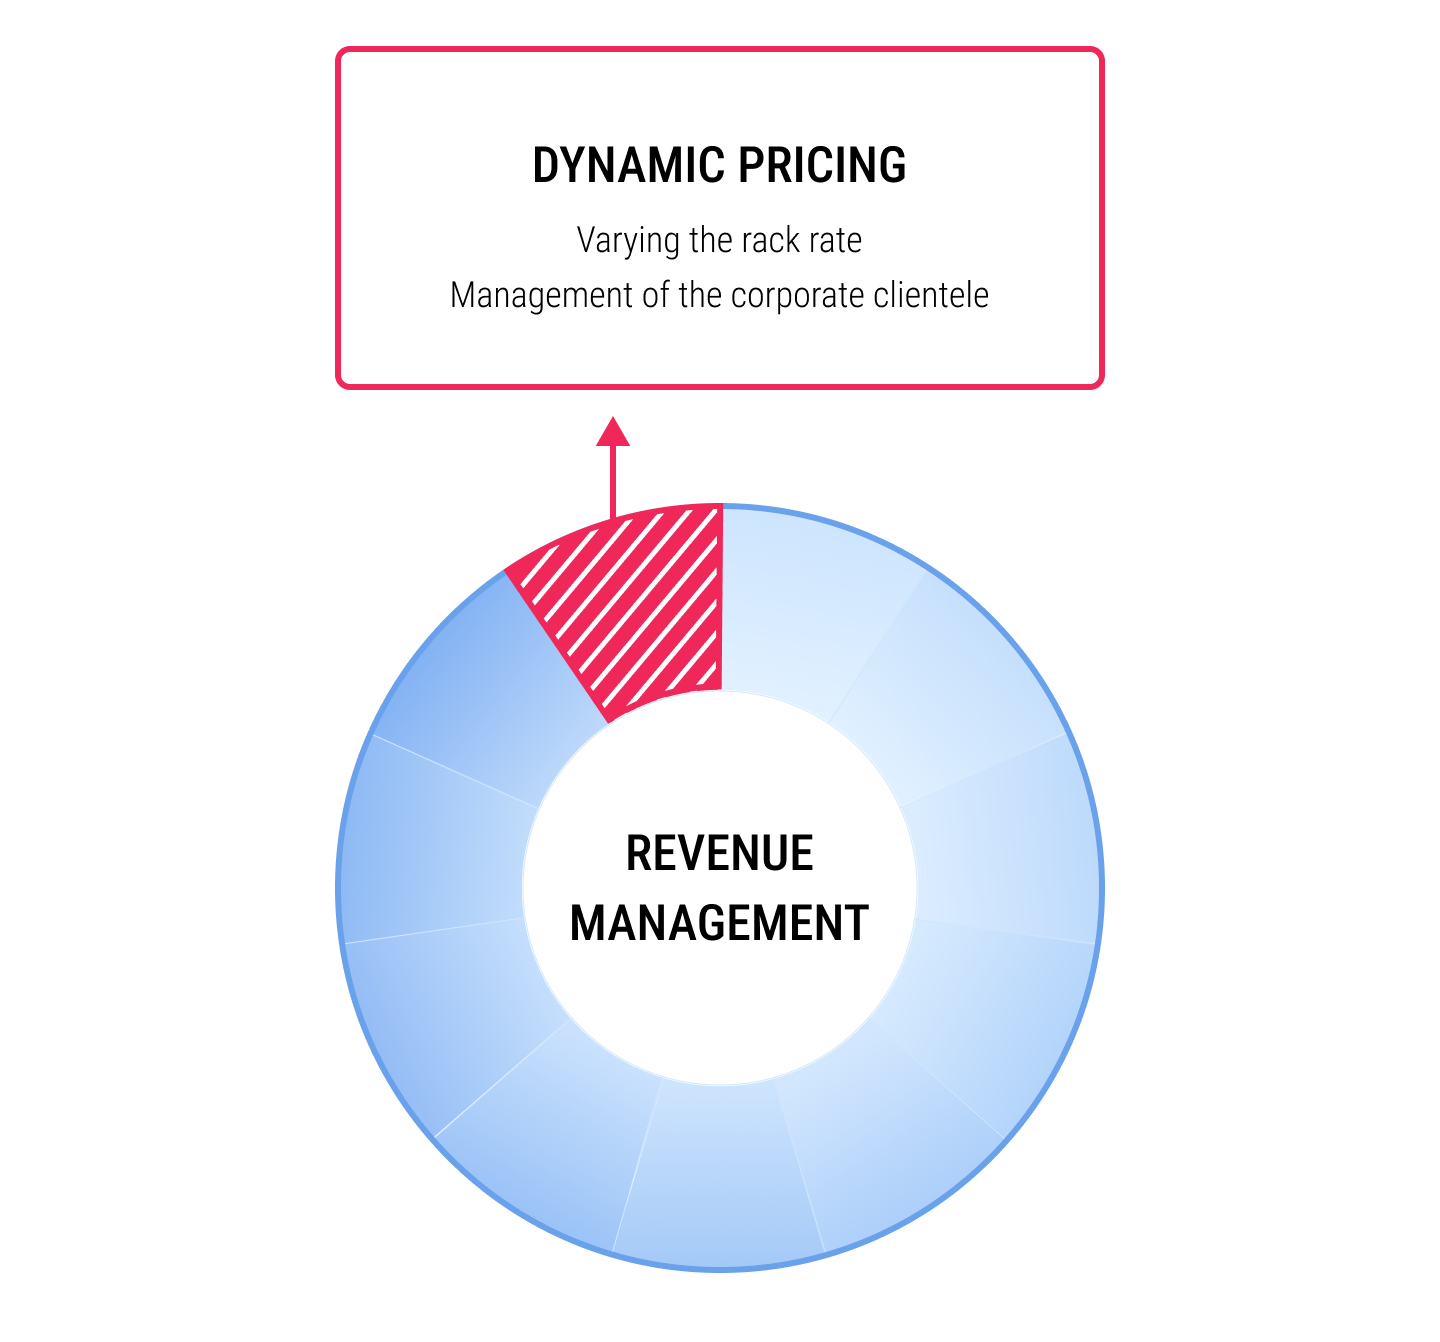 Dynamic pricing is a part of revenue management.